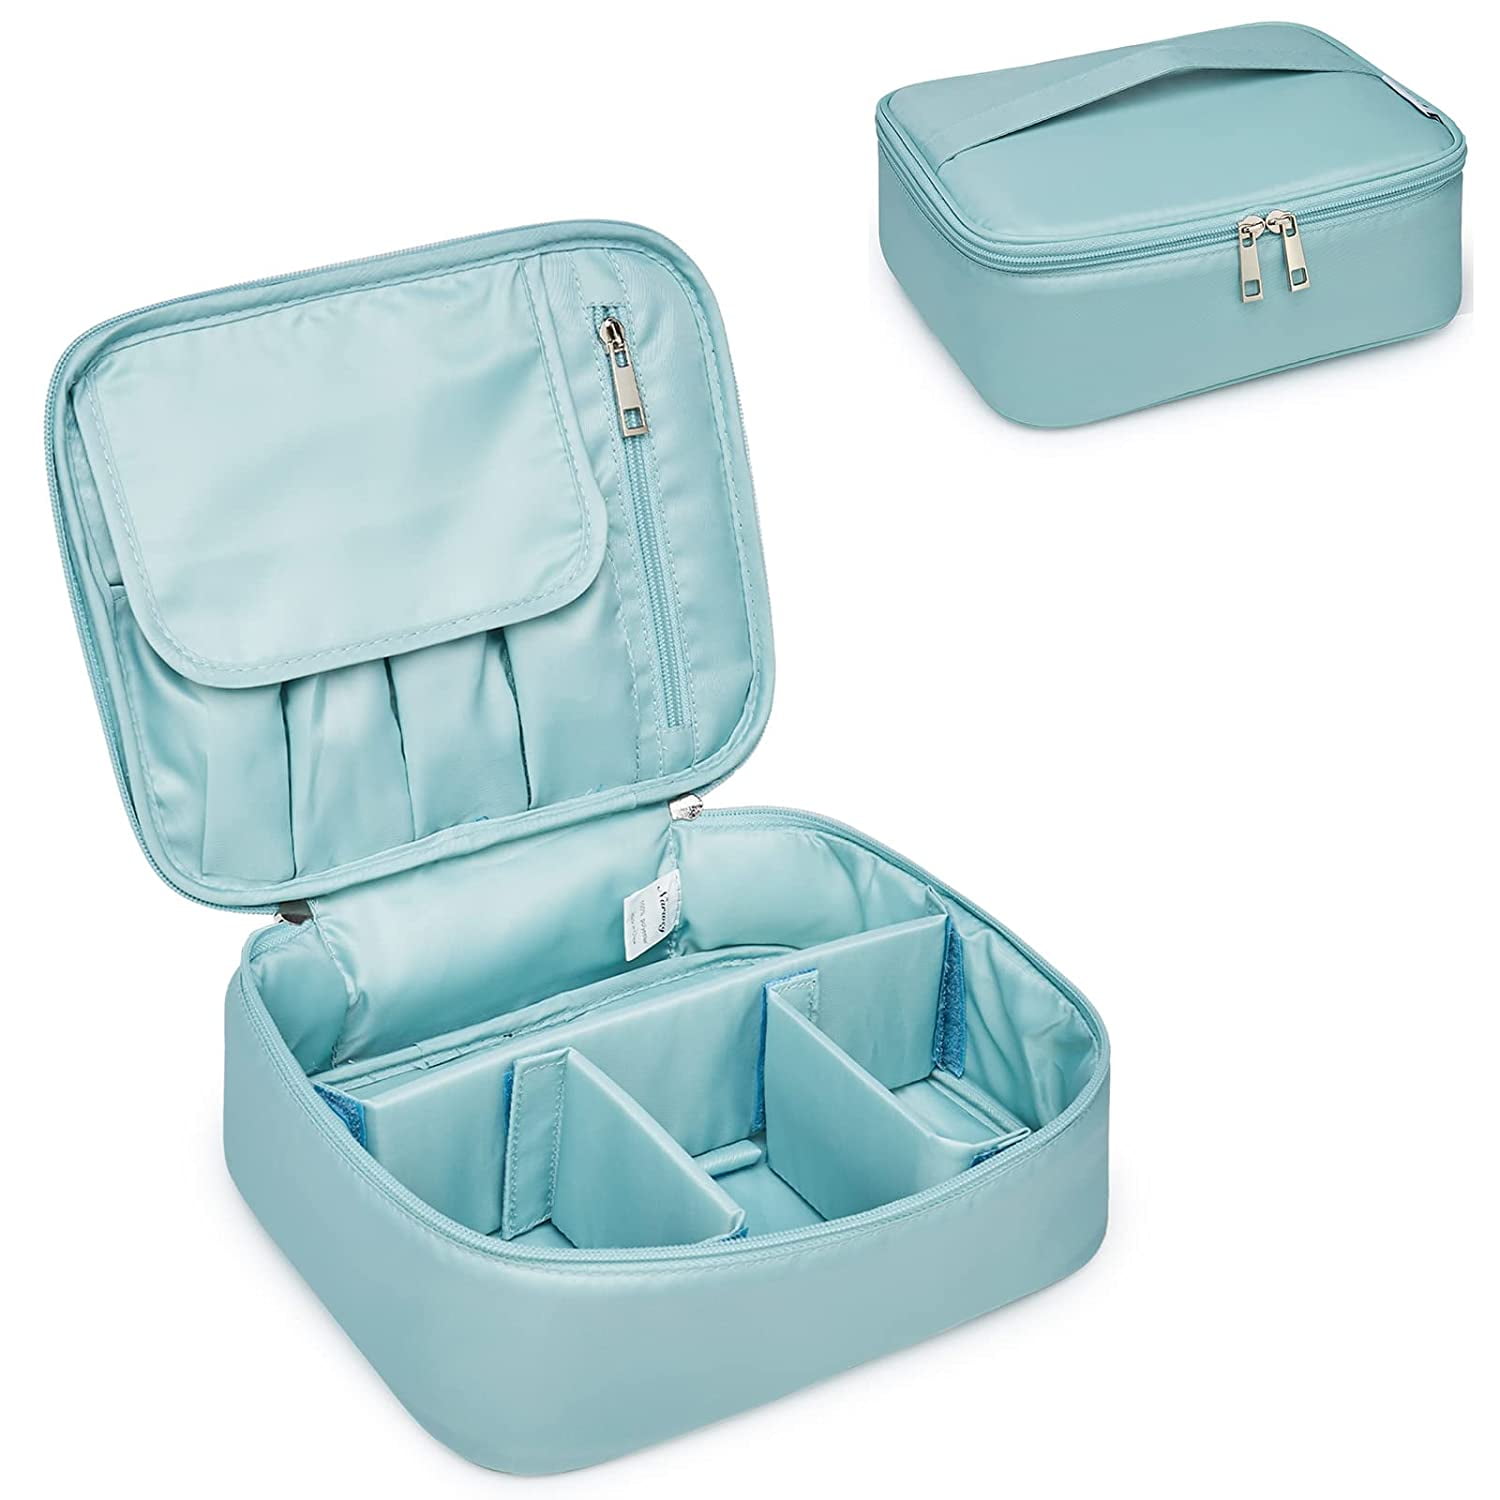 Buy cheap Travel Jewelry Storage Case Bag Women NW5032 For SALE – narwey